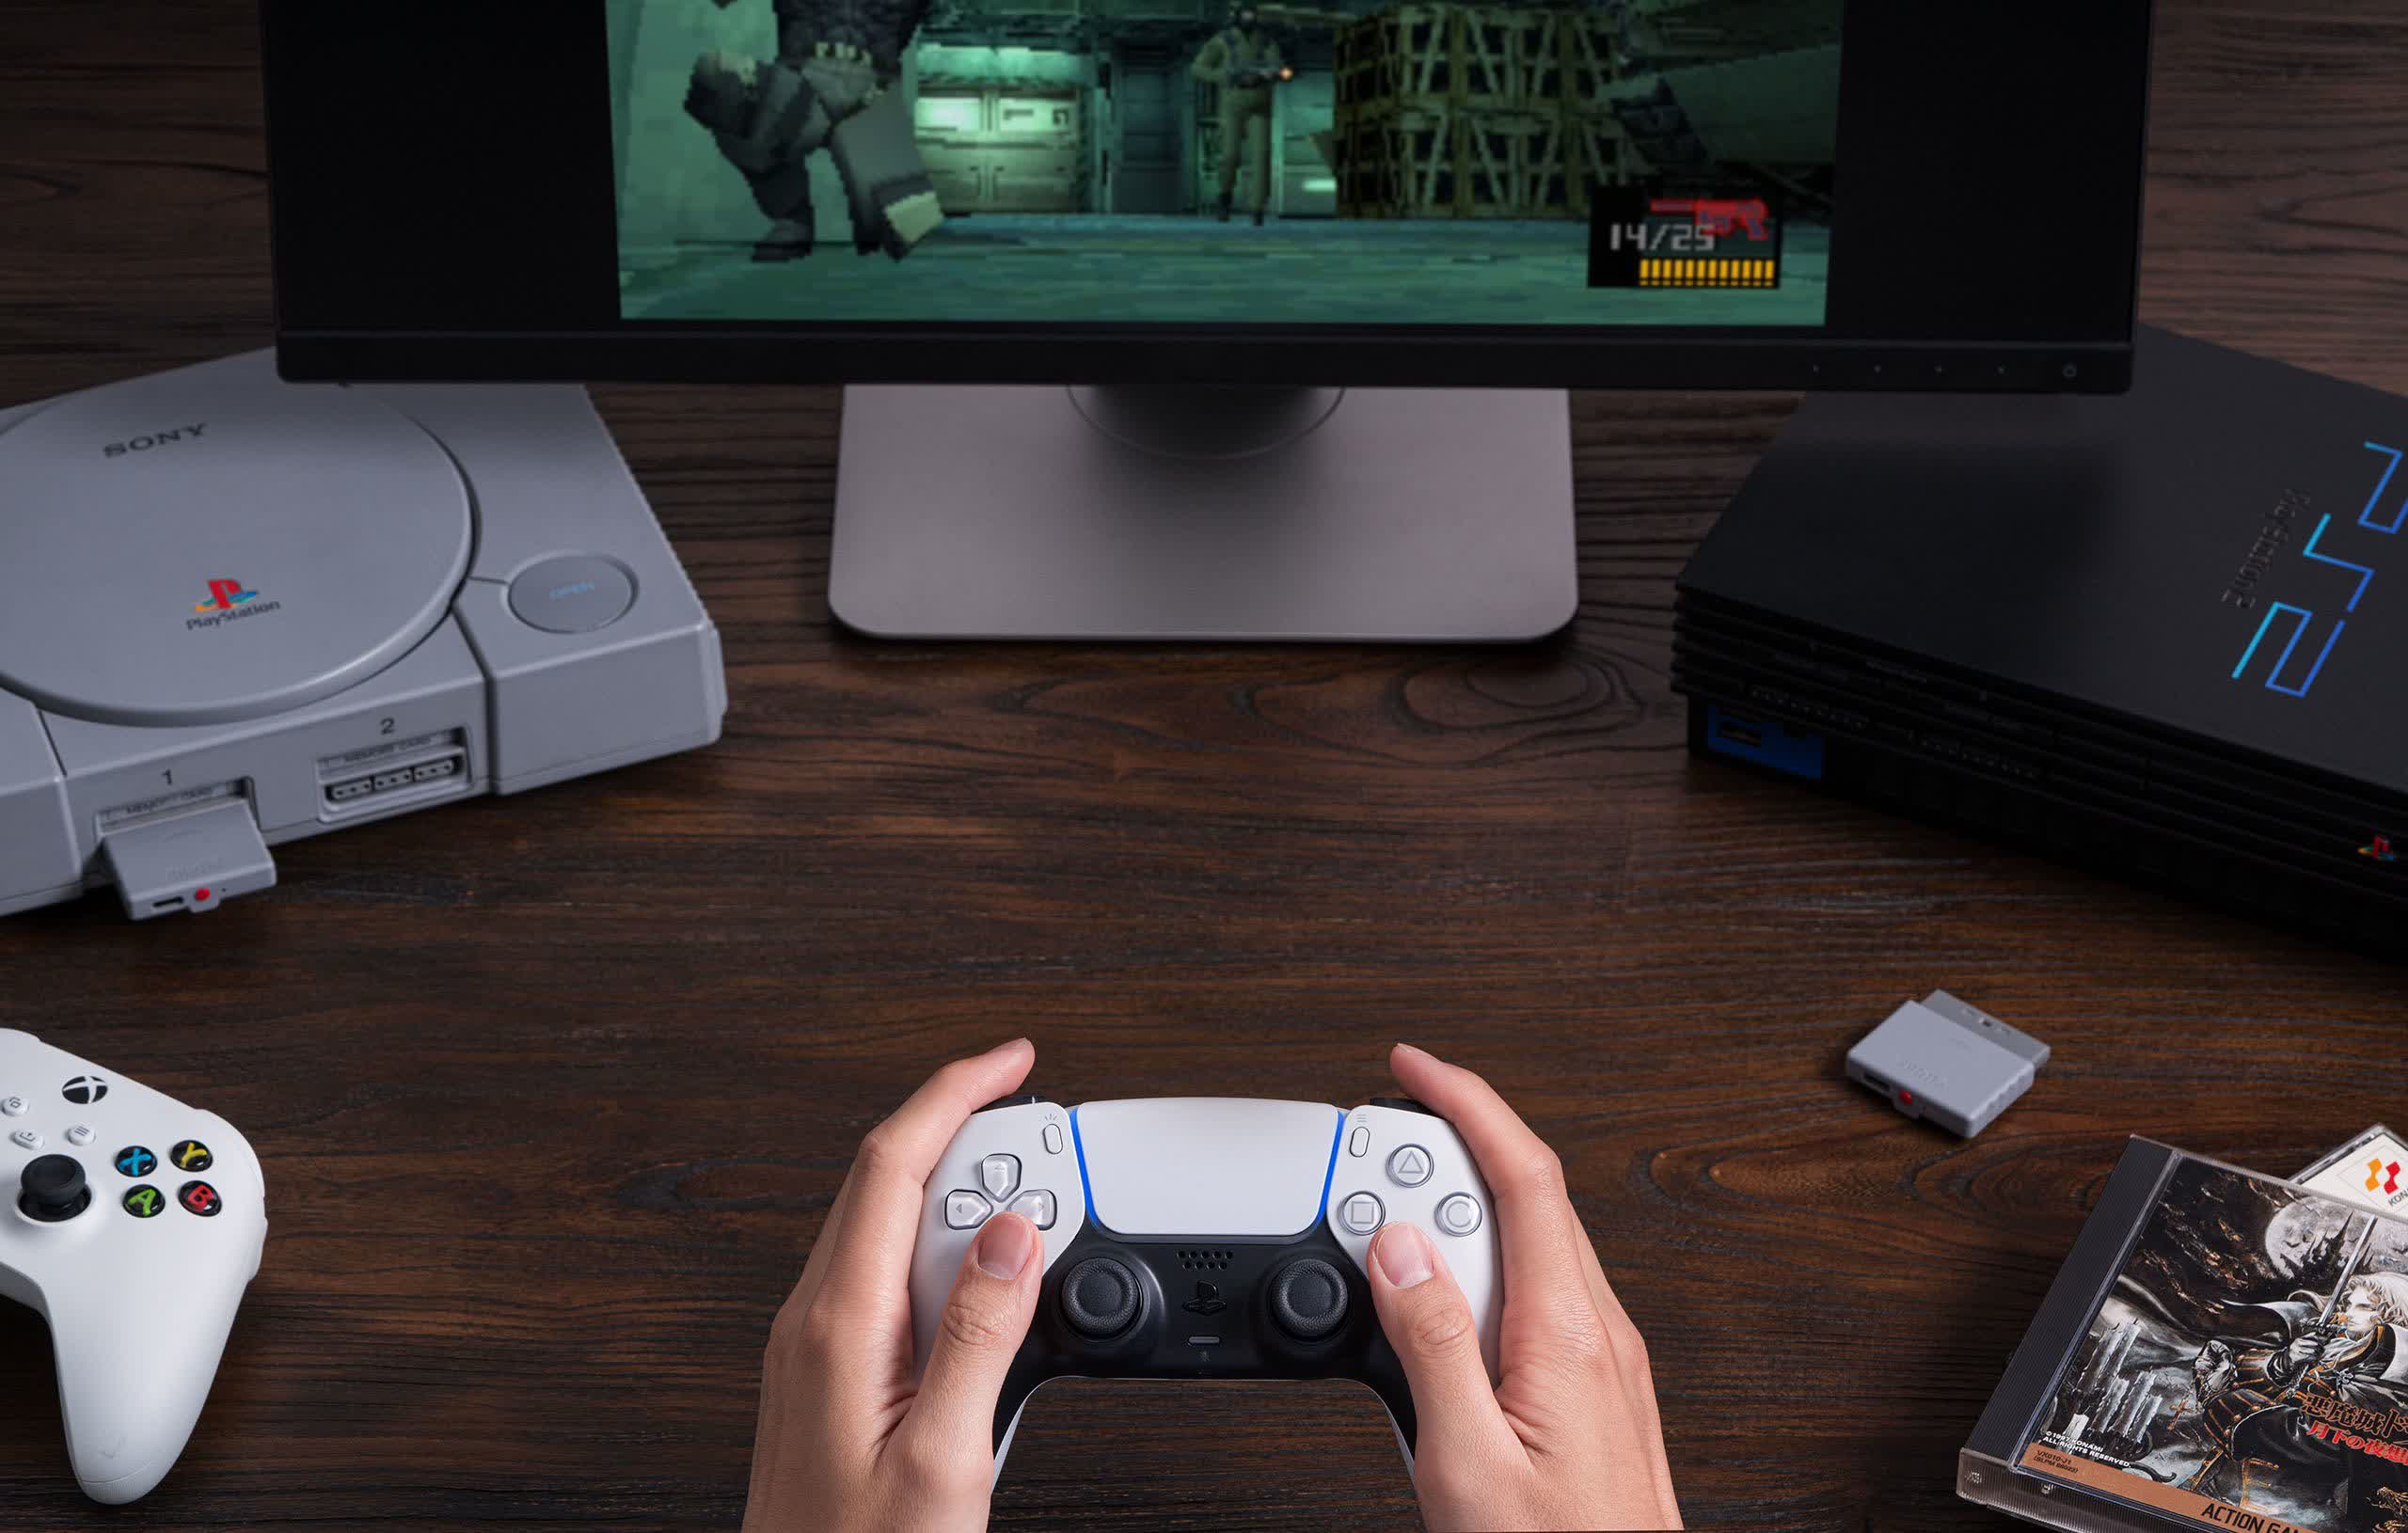 8BitDo releases adapter for using modern controllers on PS1 and PS2